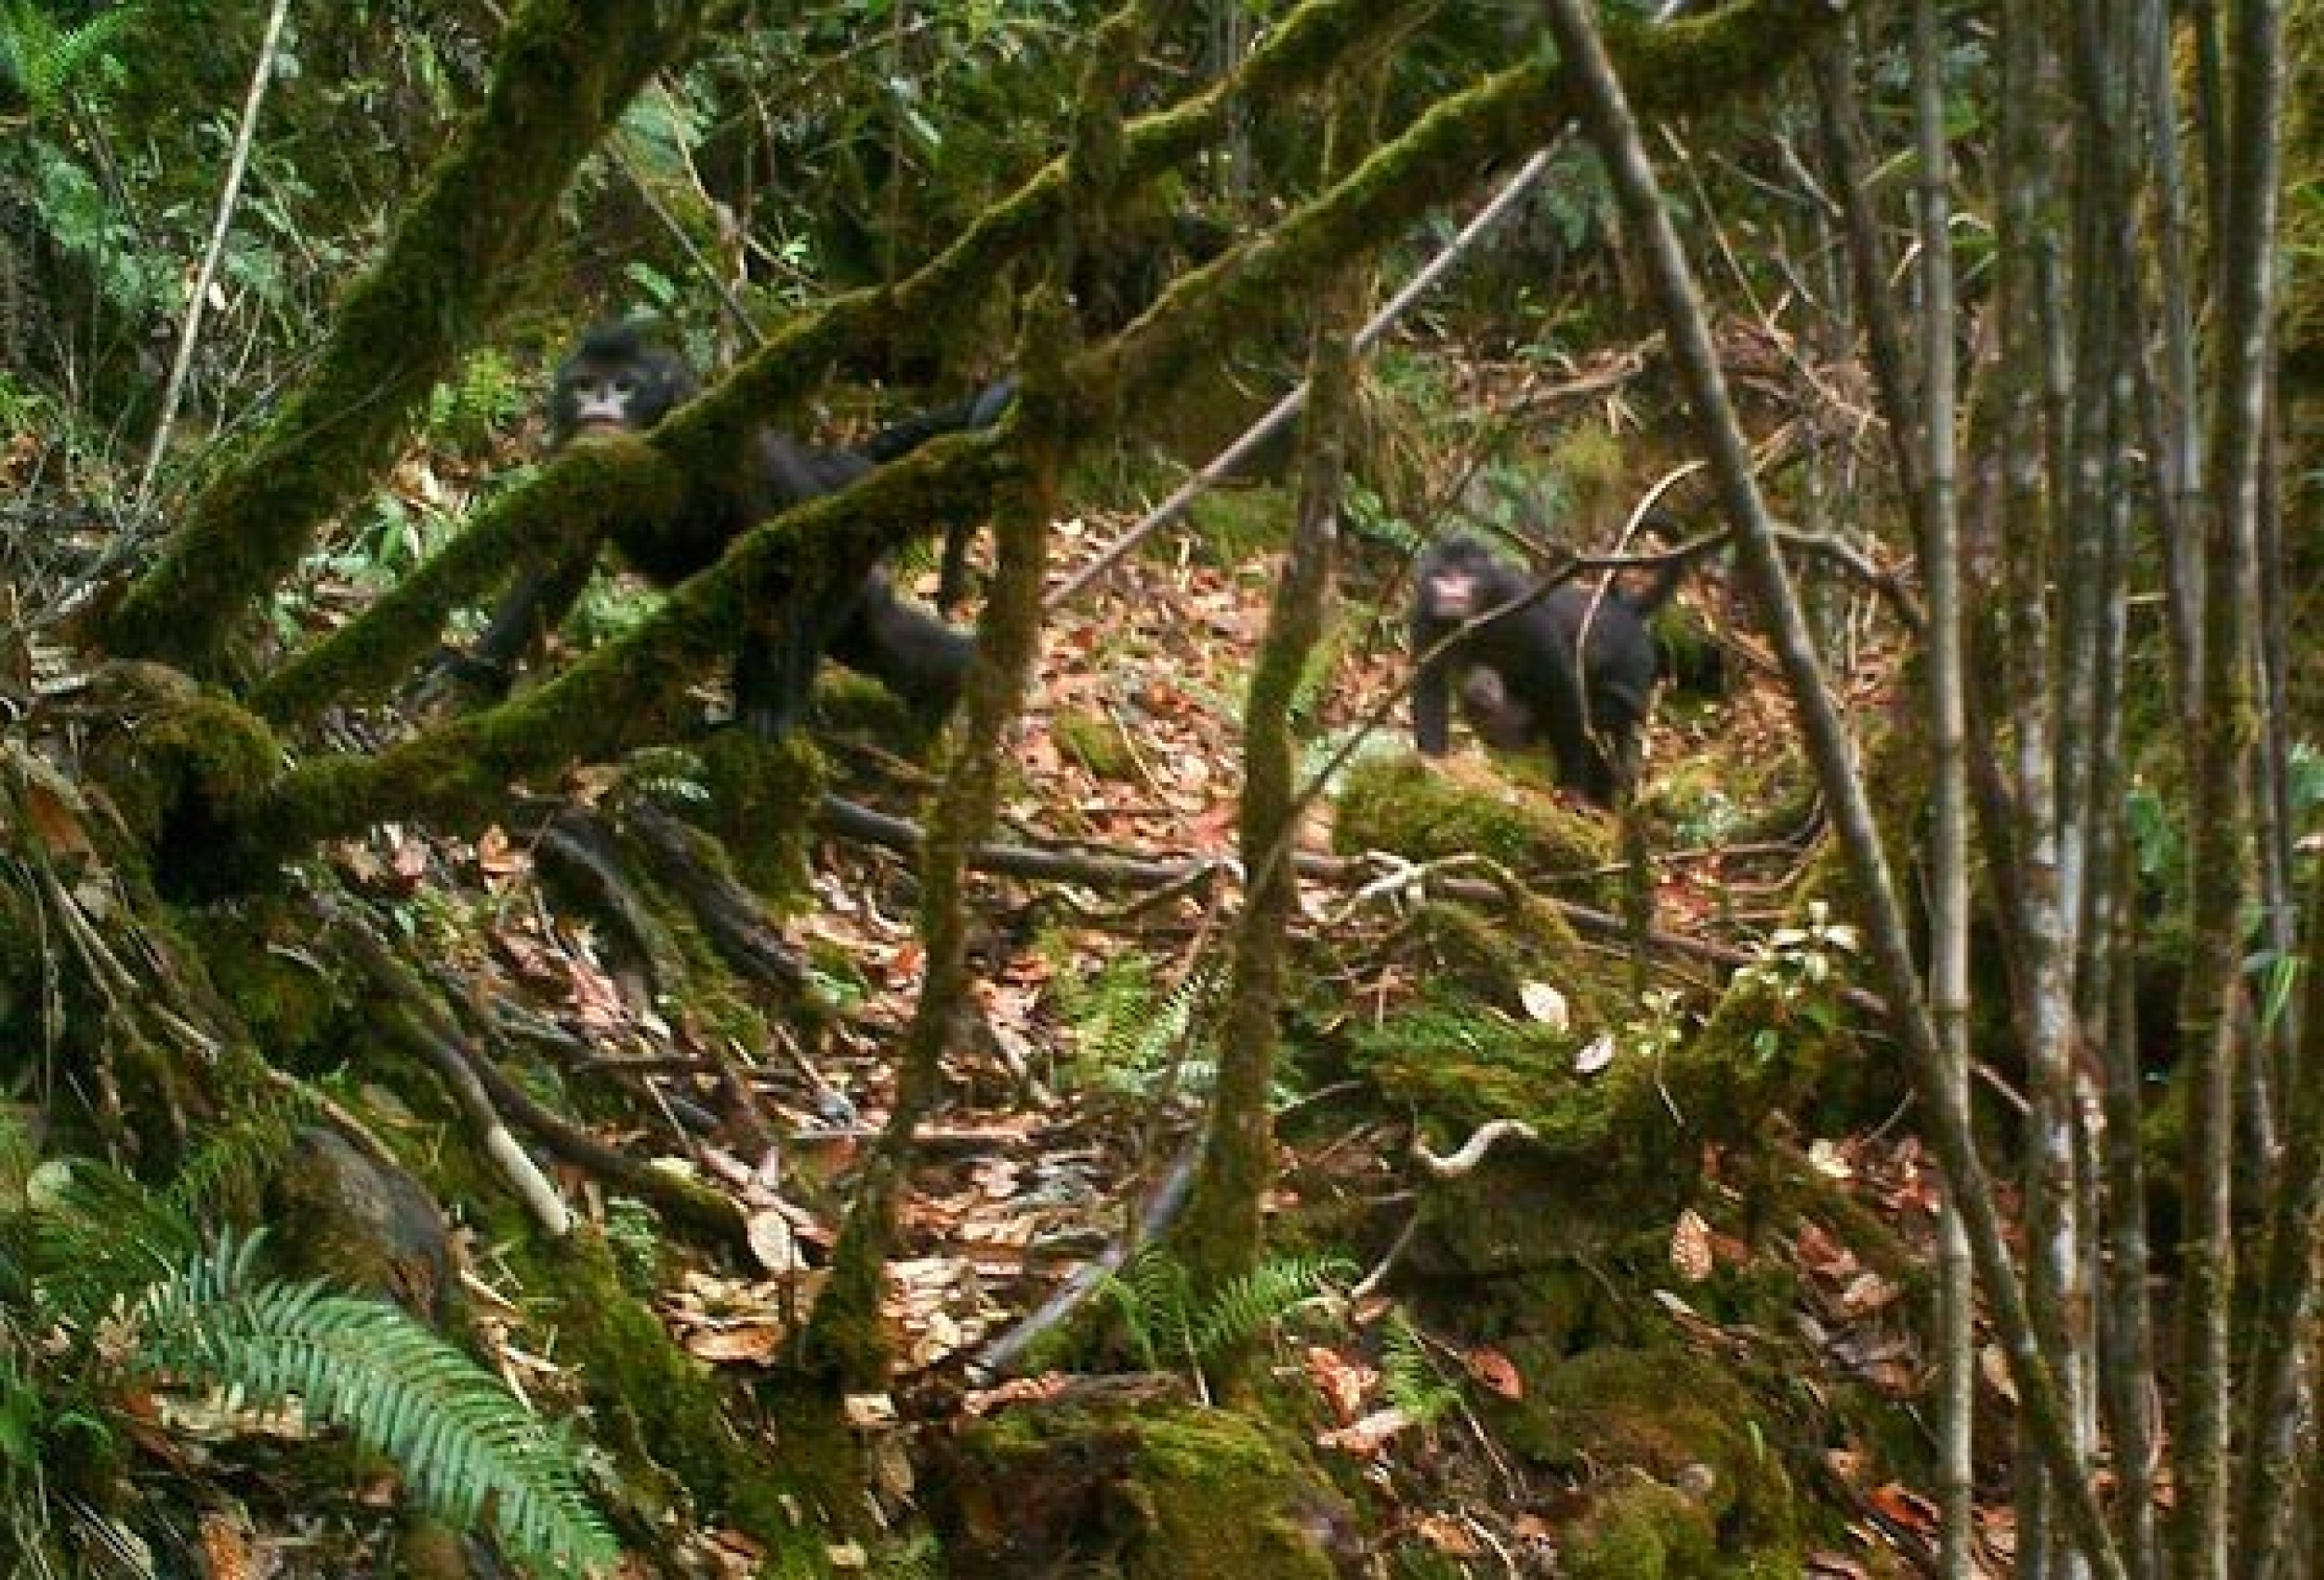 First Images of Rare Snub-Nosed Monkey Captured in Myanmar